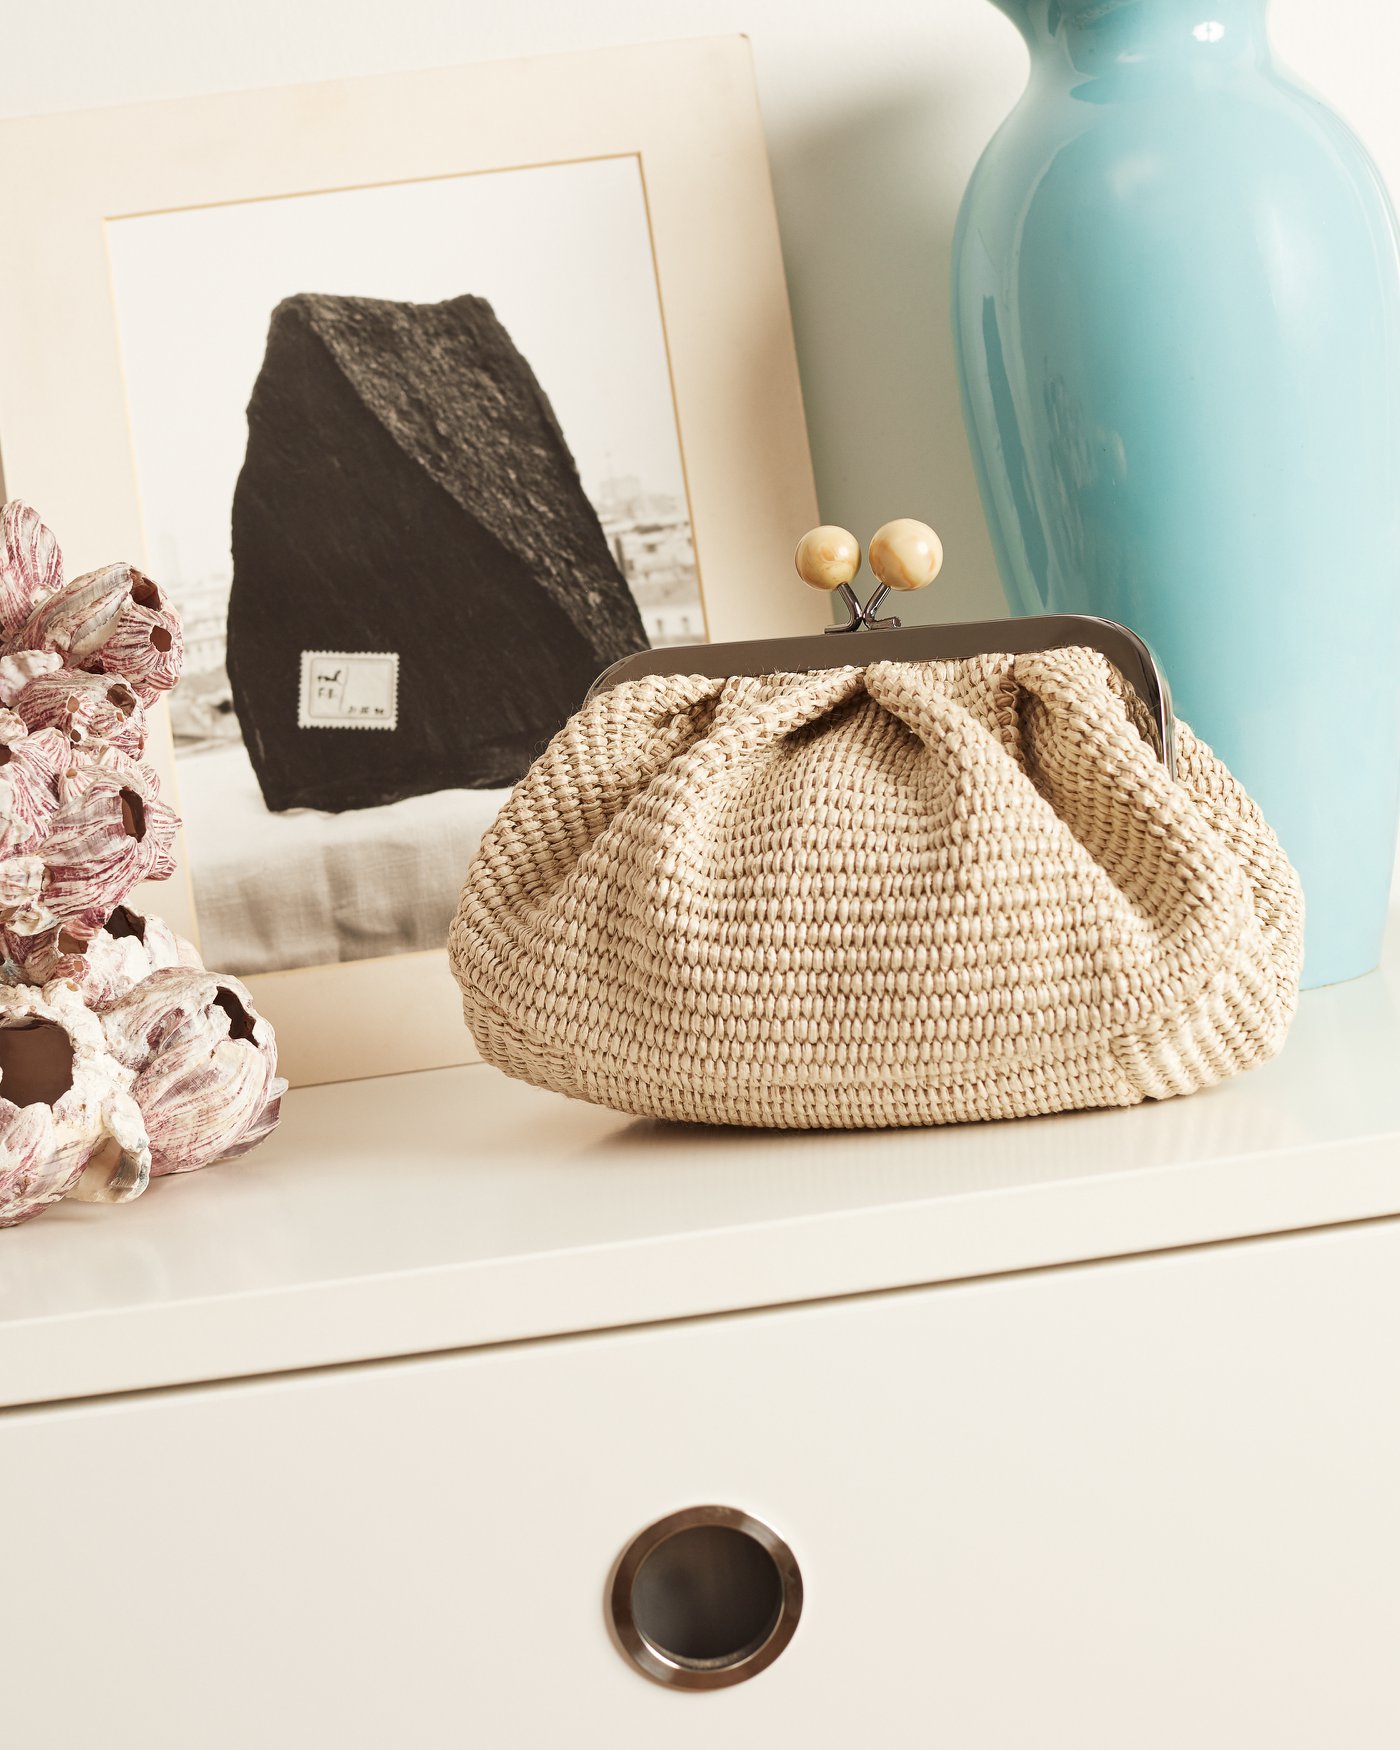 At home with a Weekender. A 24/7 soft-hued Pasticcino Bag.